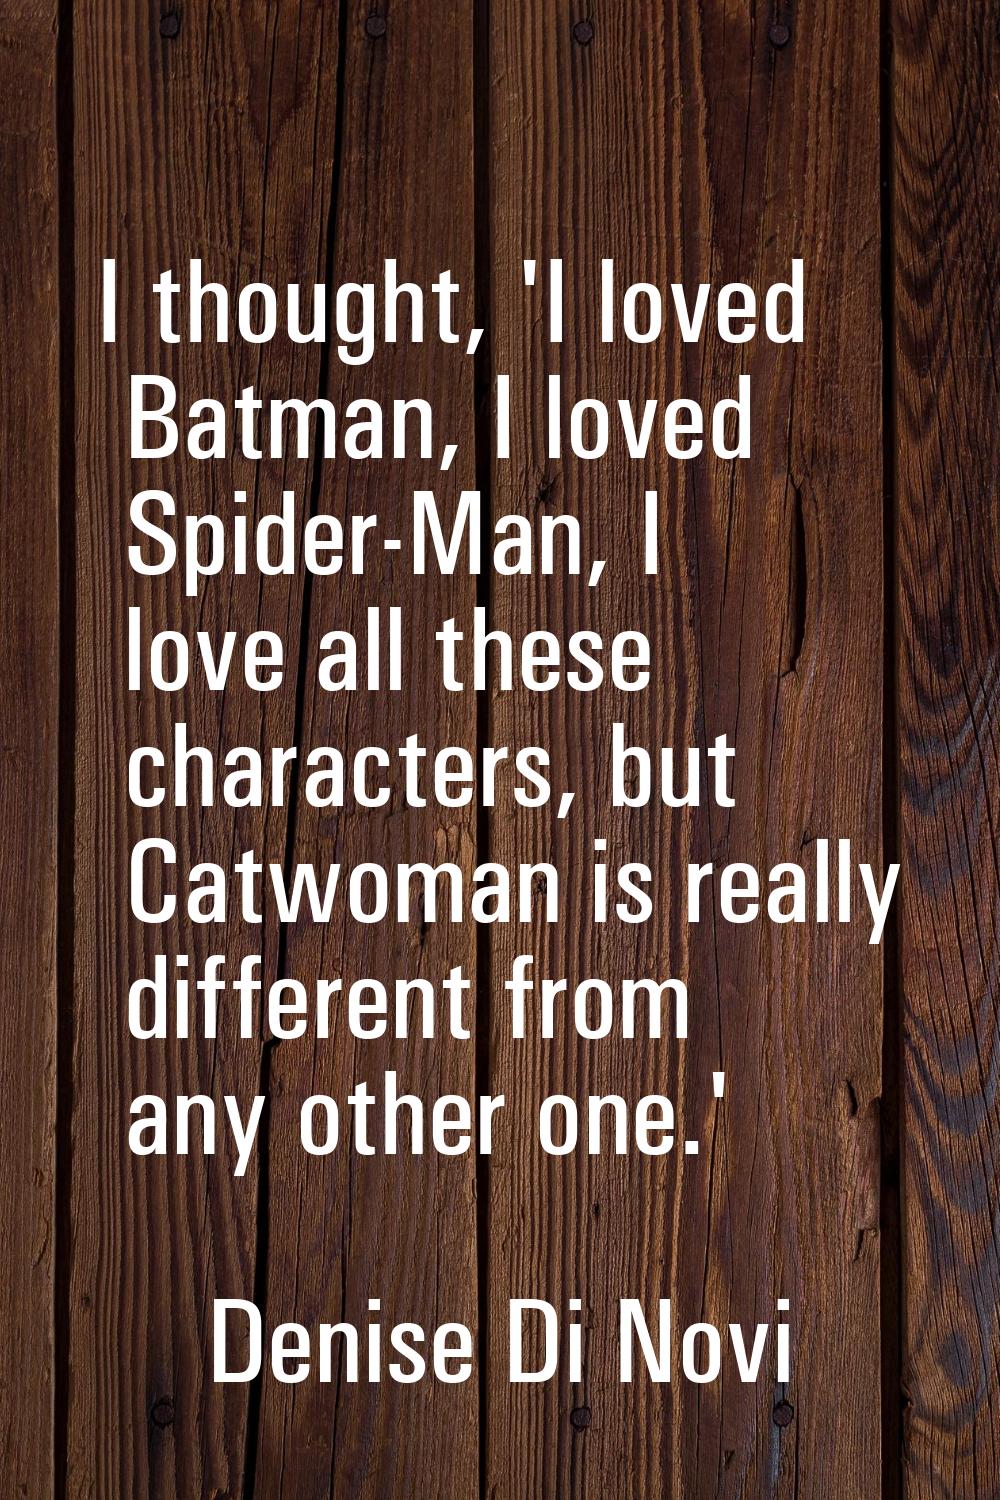 I thought, 'I loved Batman, I loved Spider-Man, I love all these characters, but Catwoman is really